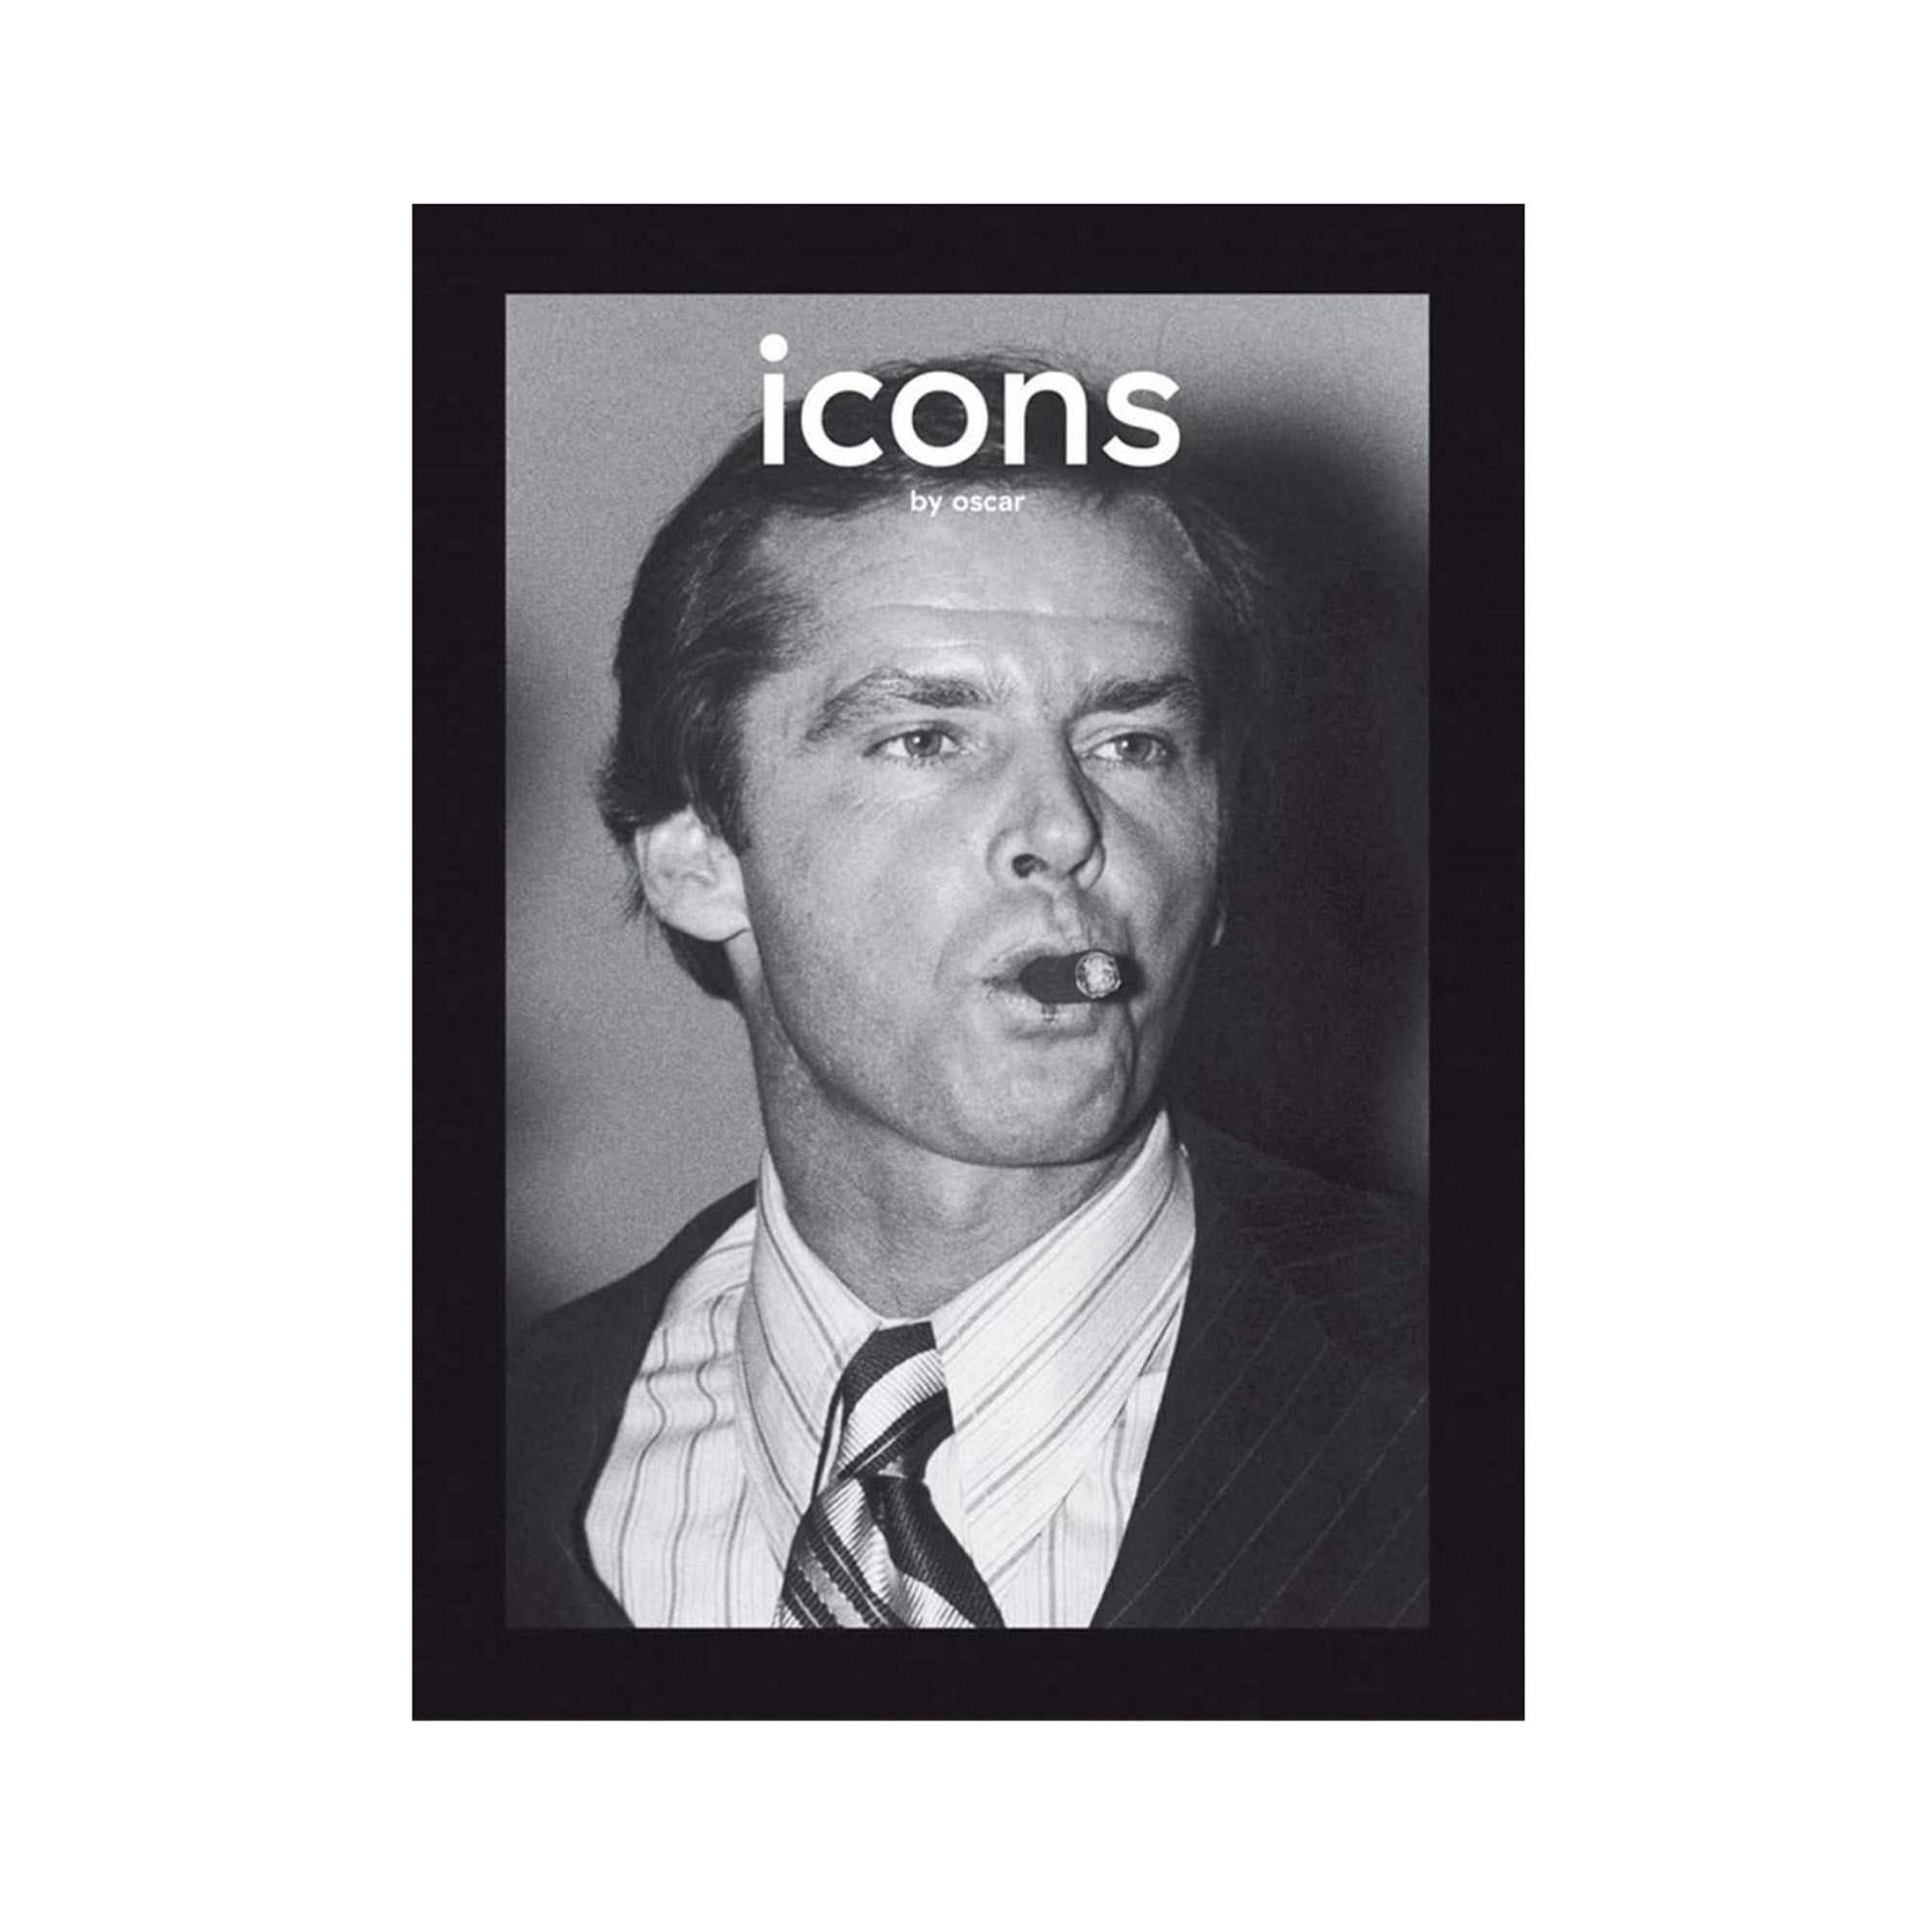 Icons by Oscar - Hardcover